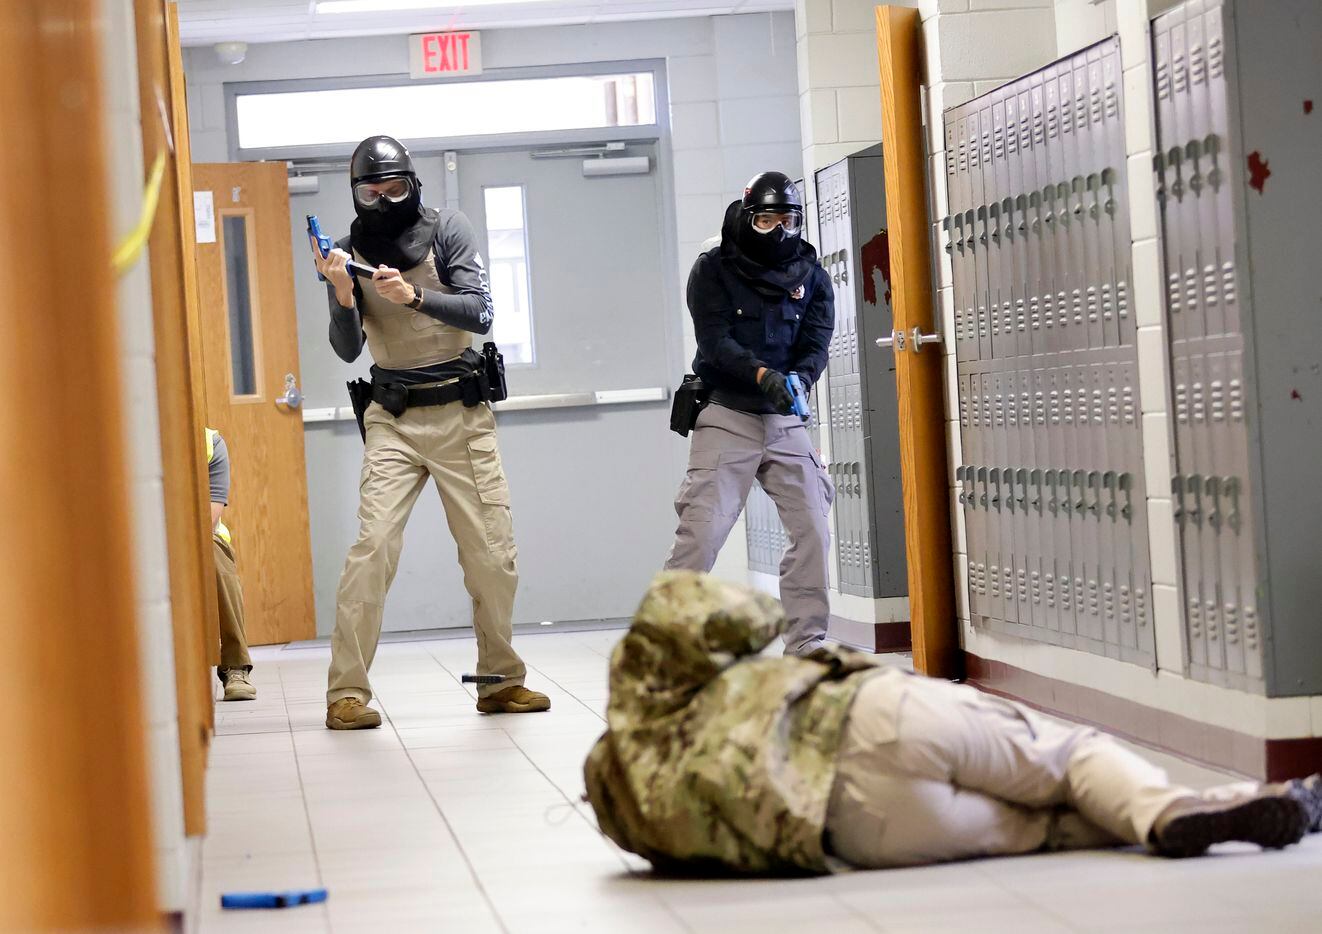 Advanced Law Enforcement Rapid Response Training instructor Troy Dupuy, acting as an active...